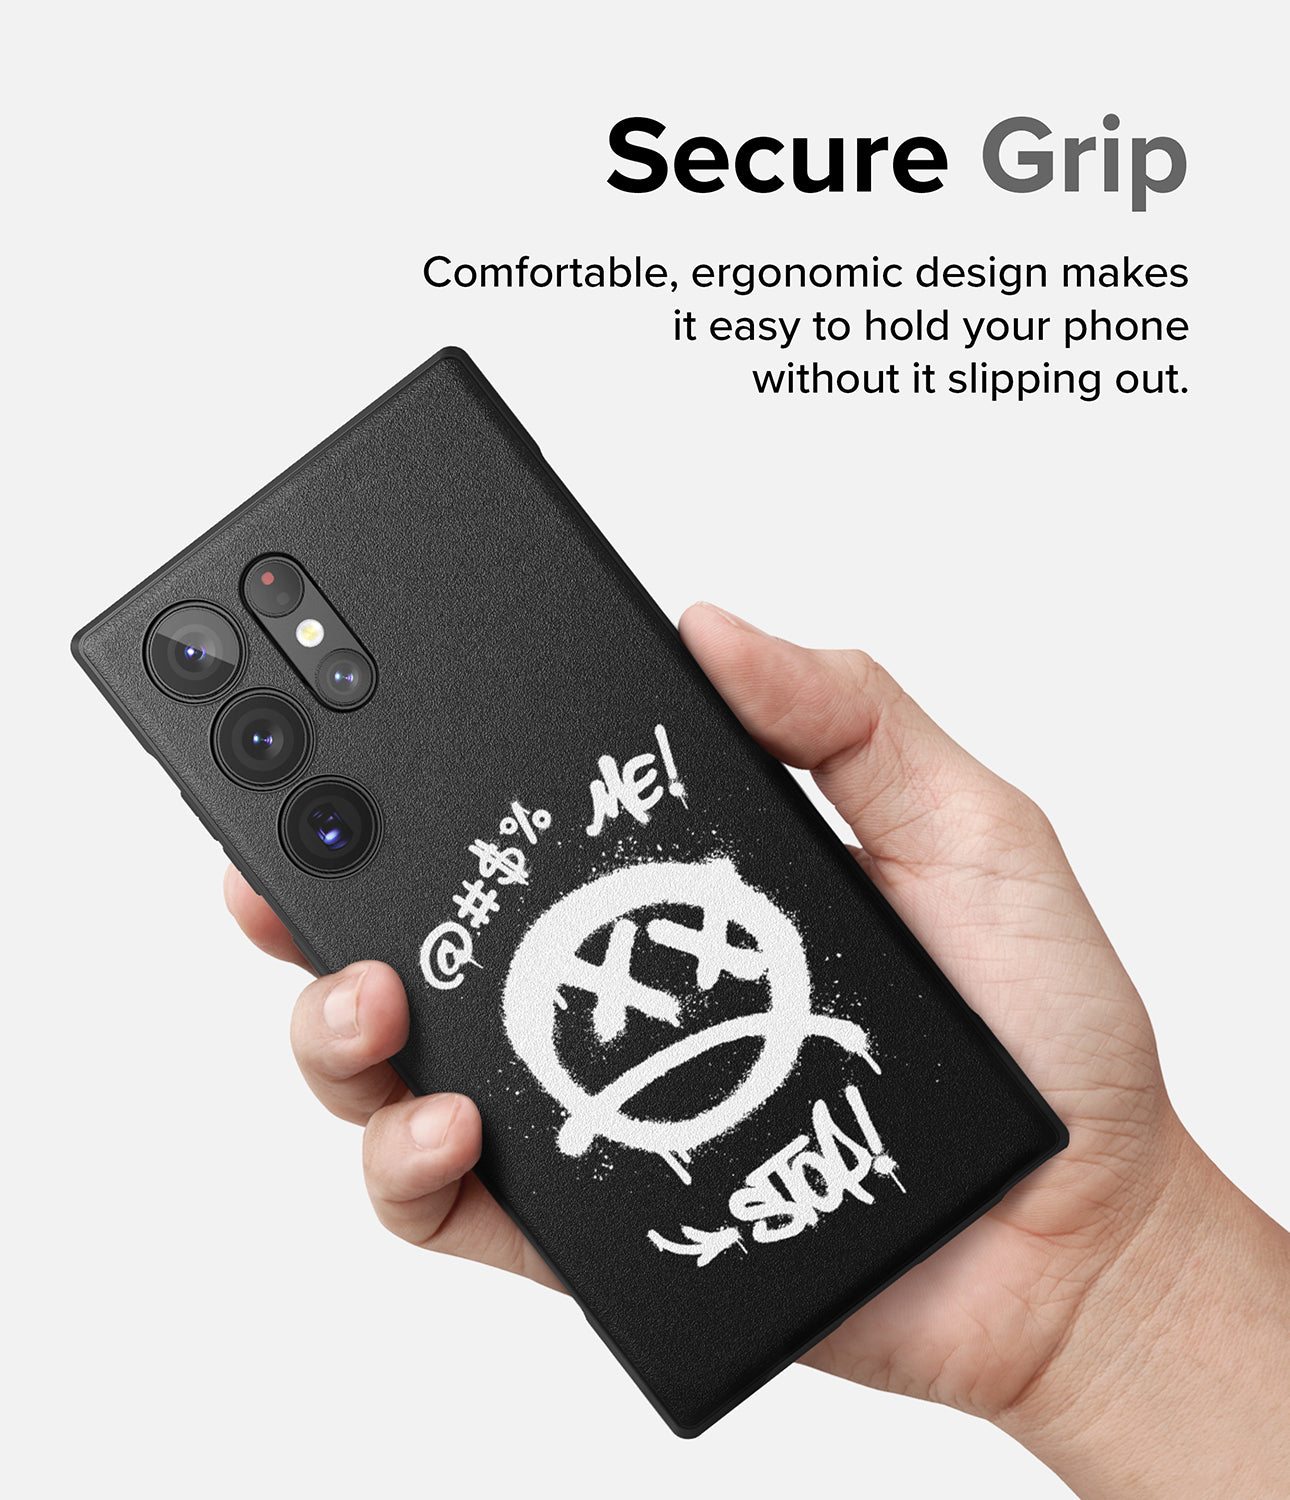 Galaxy S23 Ultra Case | Onyx Design Graffiti - Secure Grip. Comfortable, ergonomic design makes it easy to hold your phone without it slipping out.